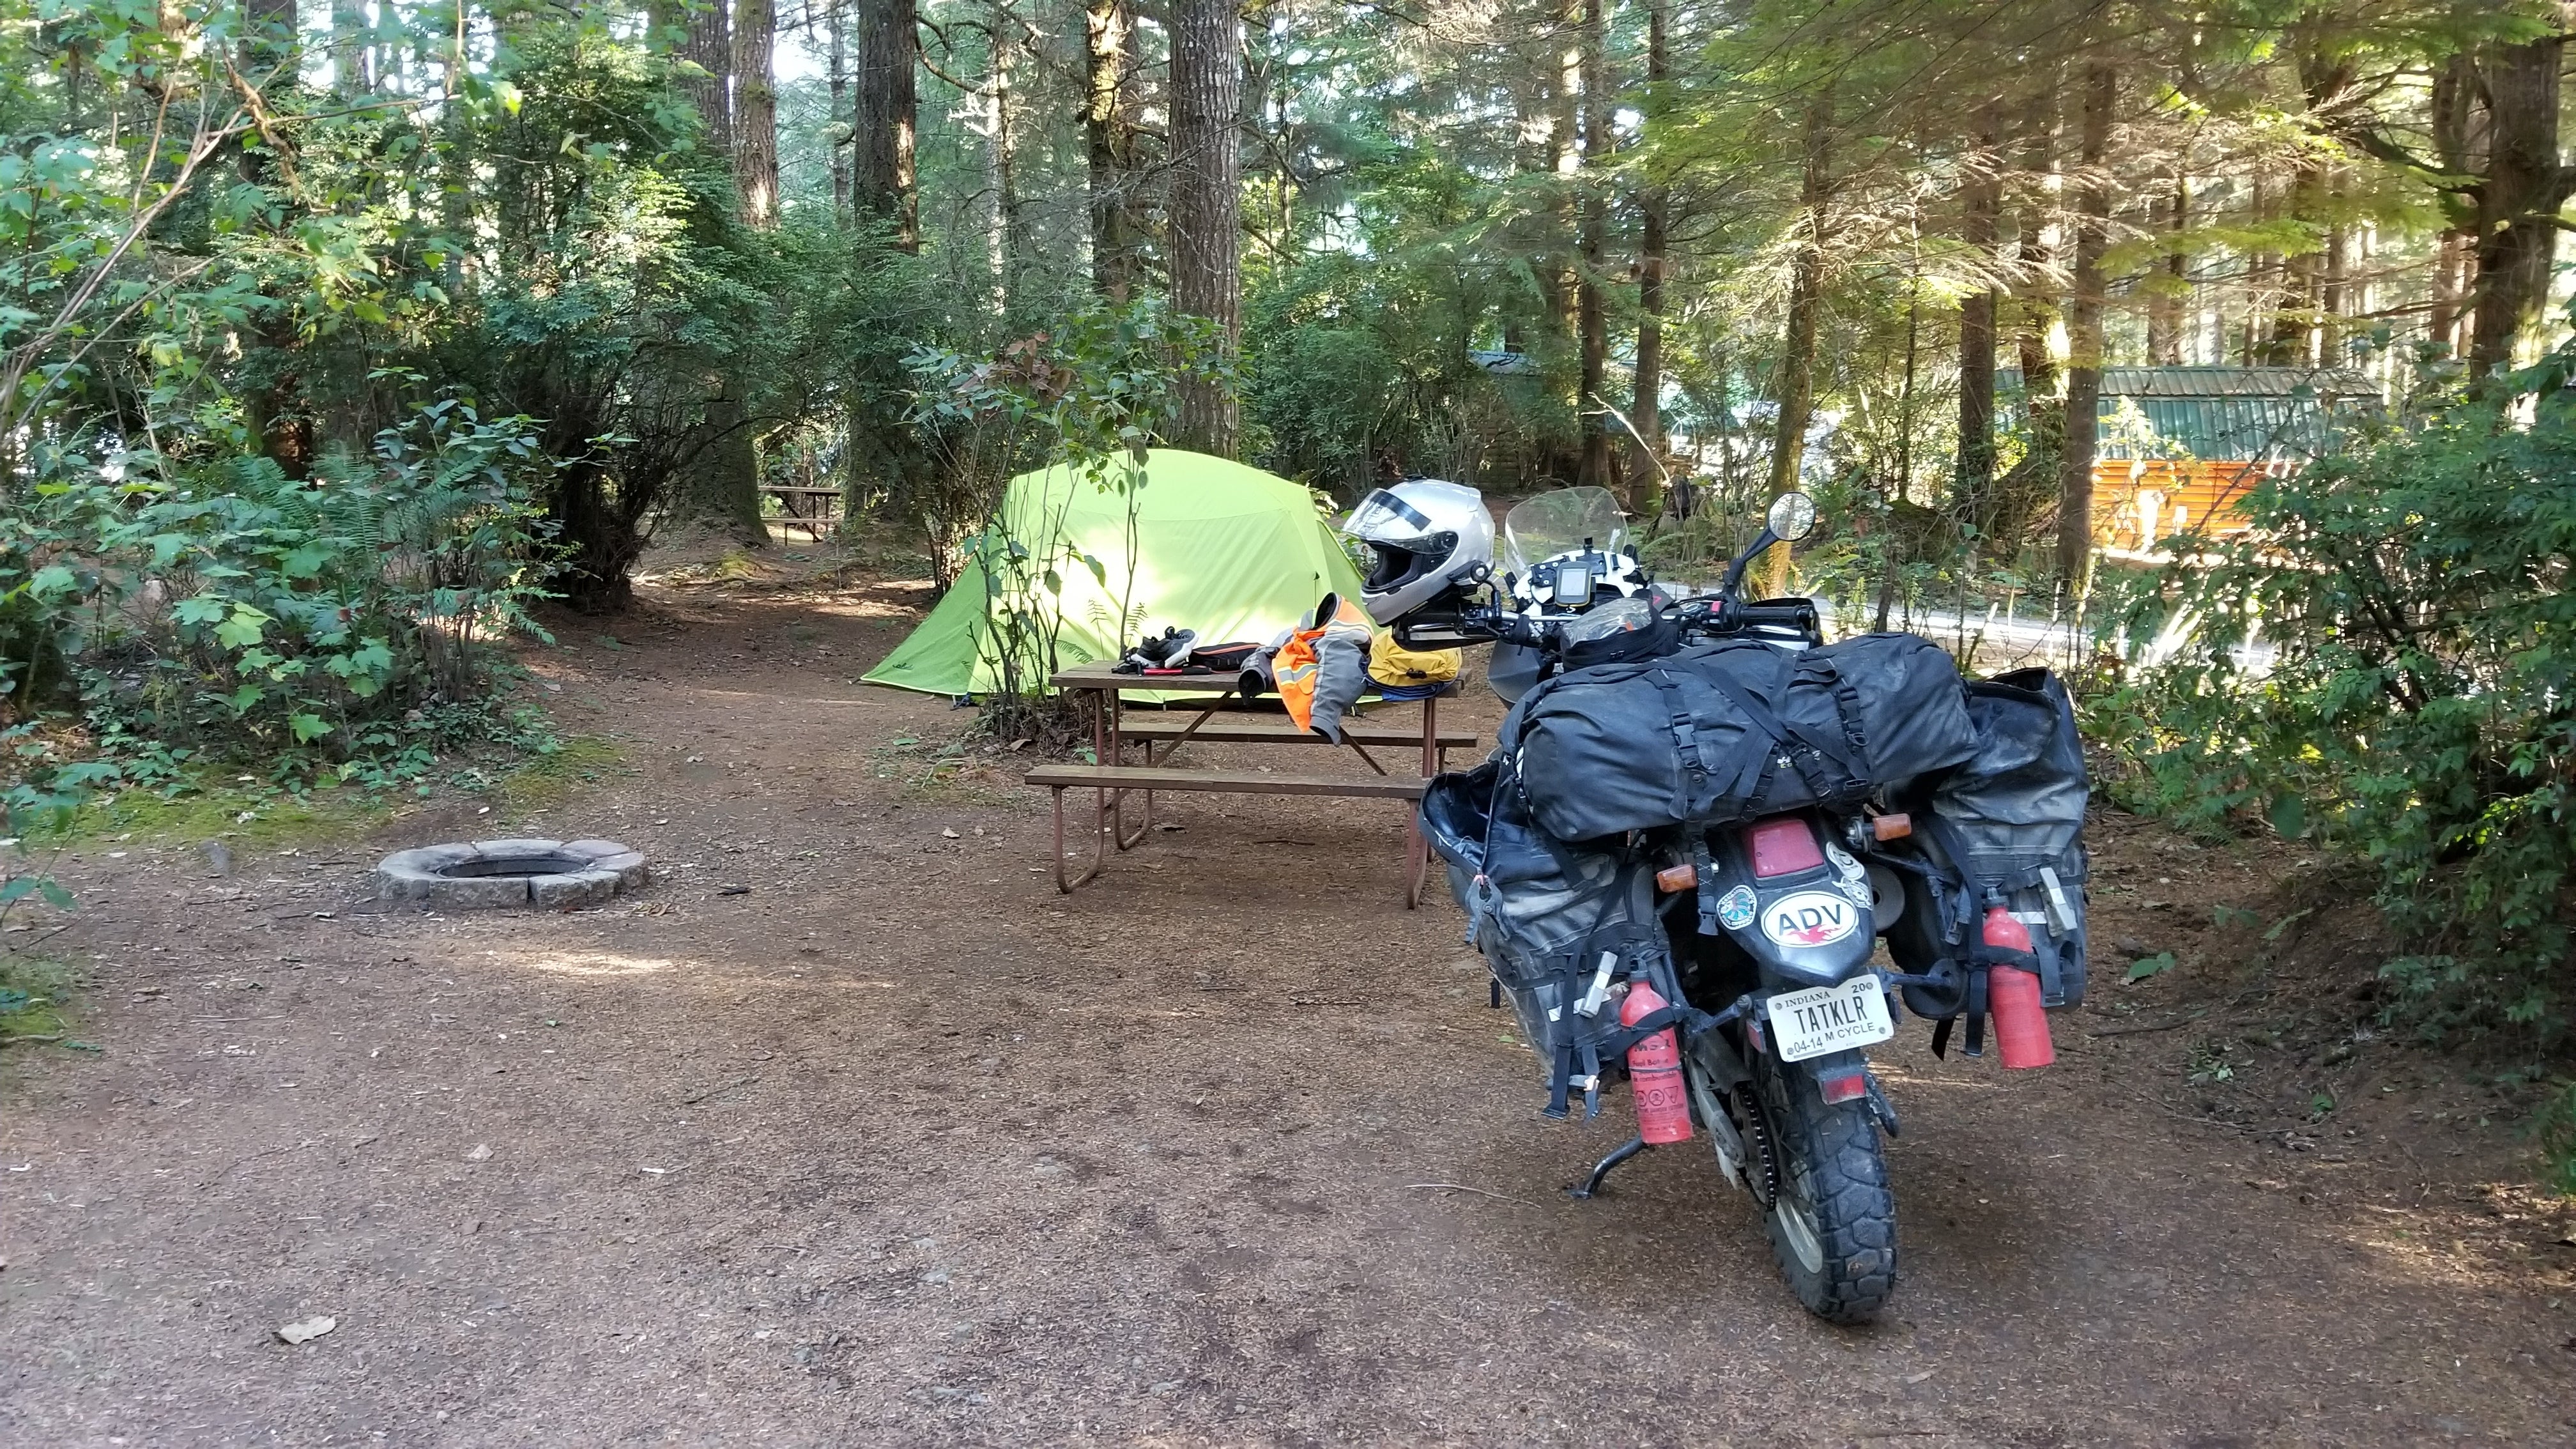 Camper submitted image from Bandon-Port Orford KOA - 5